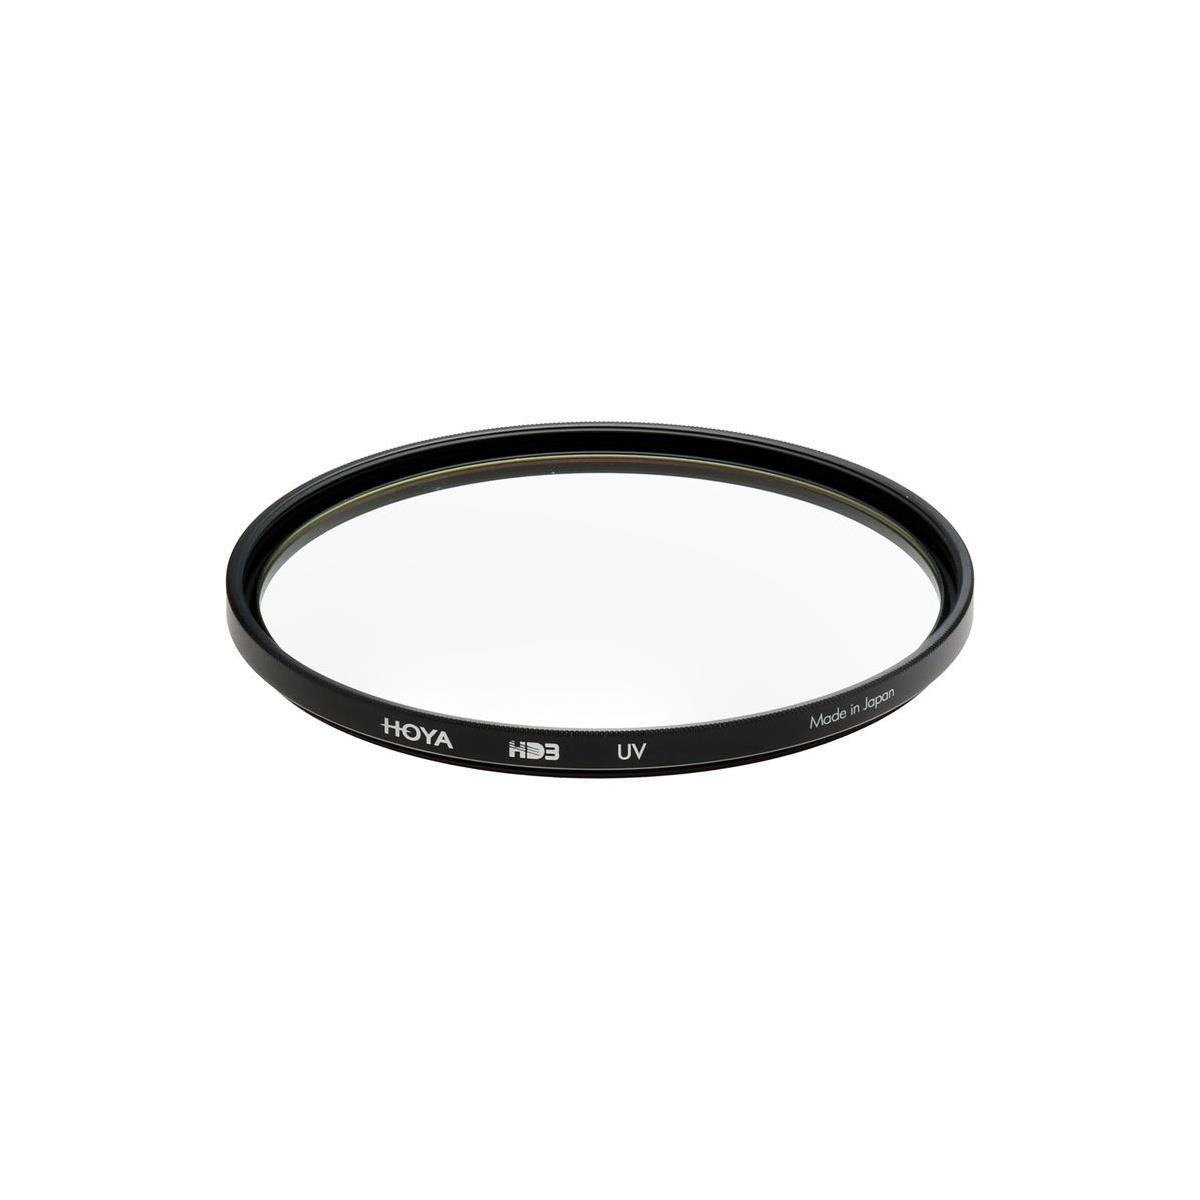 Hoya 77mm HD3 UV Filter camera effect filter center field separation diopter filter 77mm produces blurry refraction photography filter